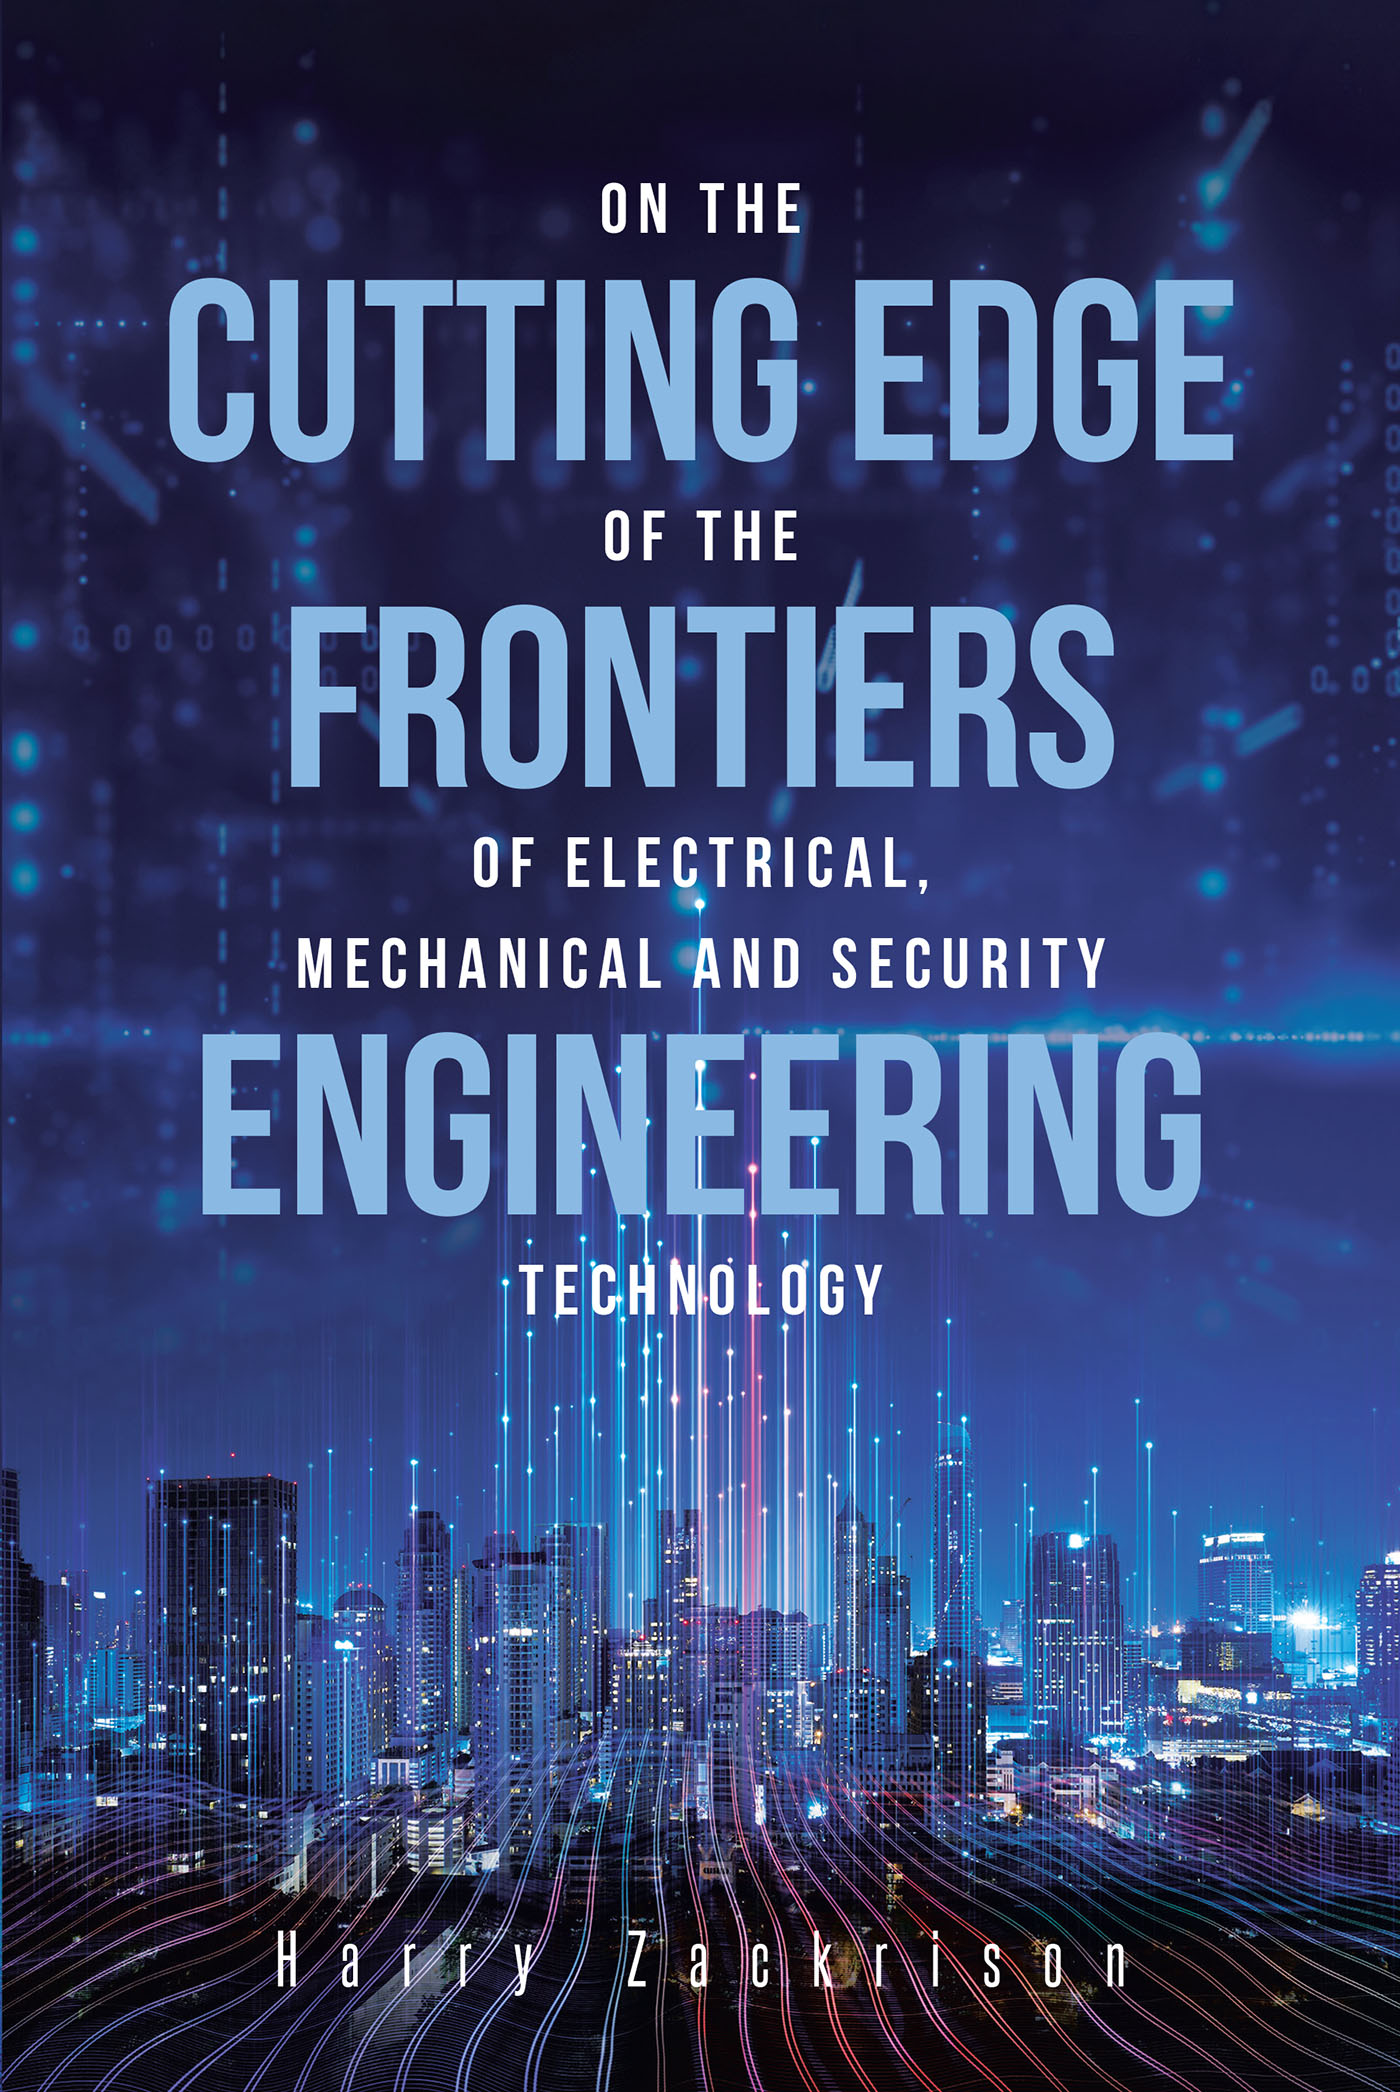 On The Cutting Edge of The Frontiers of Electrical, Mechanical and Security Engineering Technology Cover Image